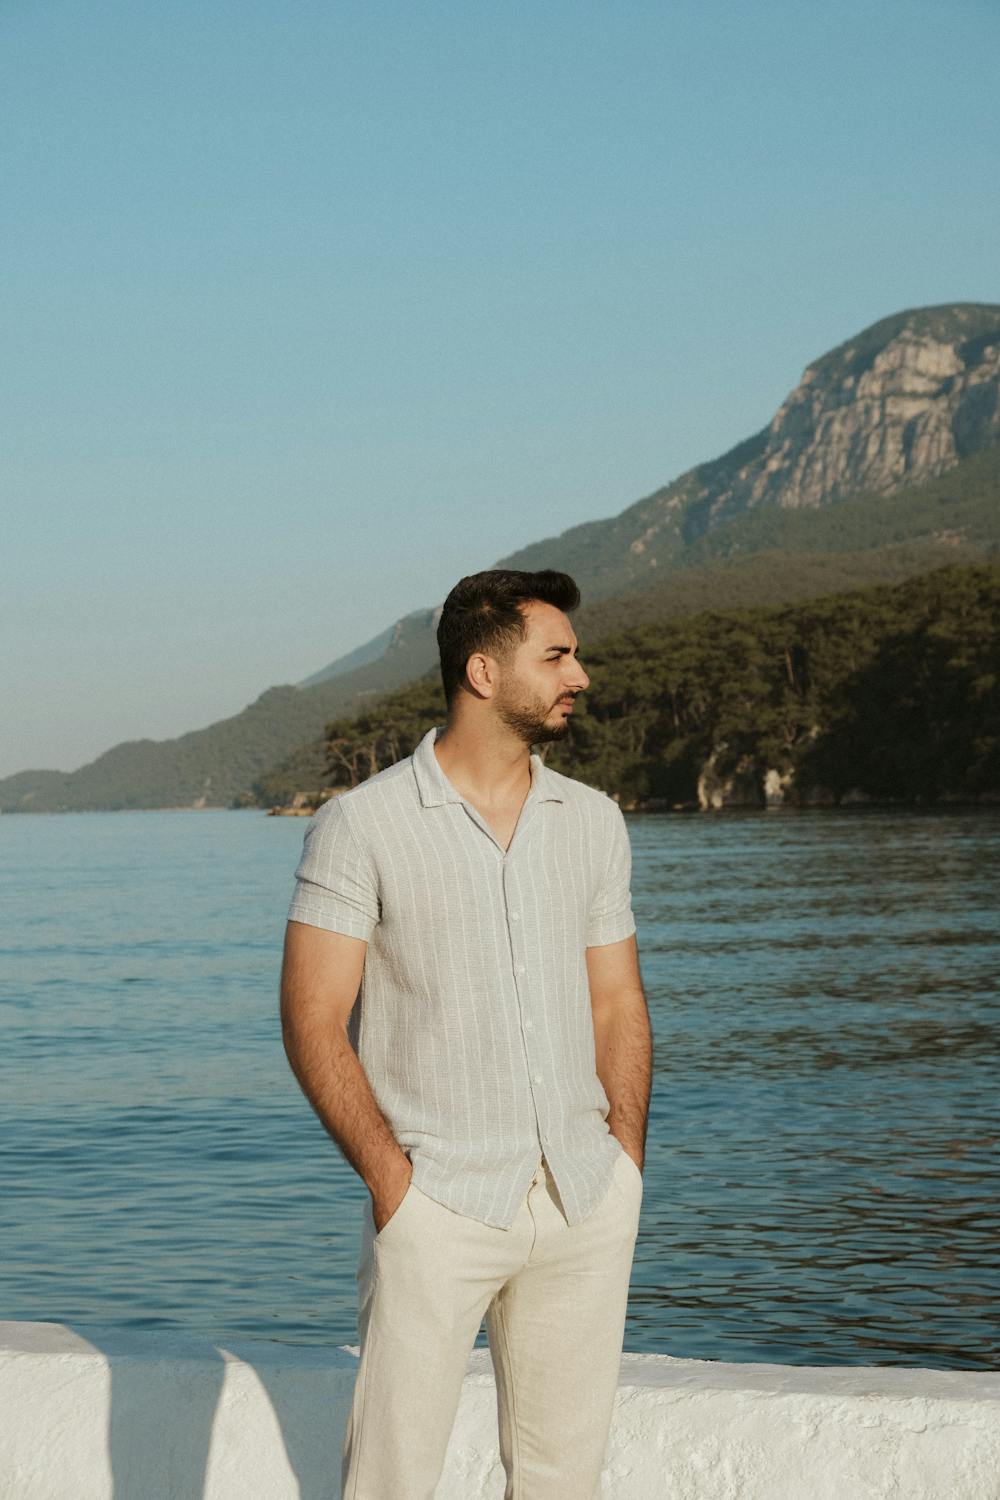 Man in White Short Sleeved Shirt Posing at a Seashore with a Mountain ...